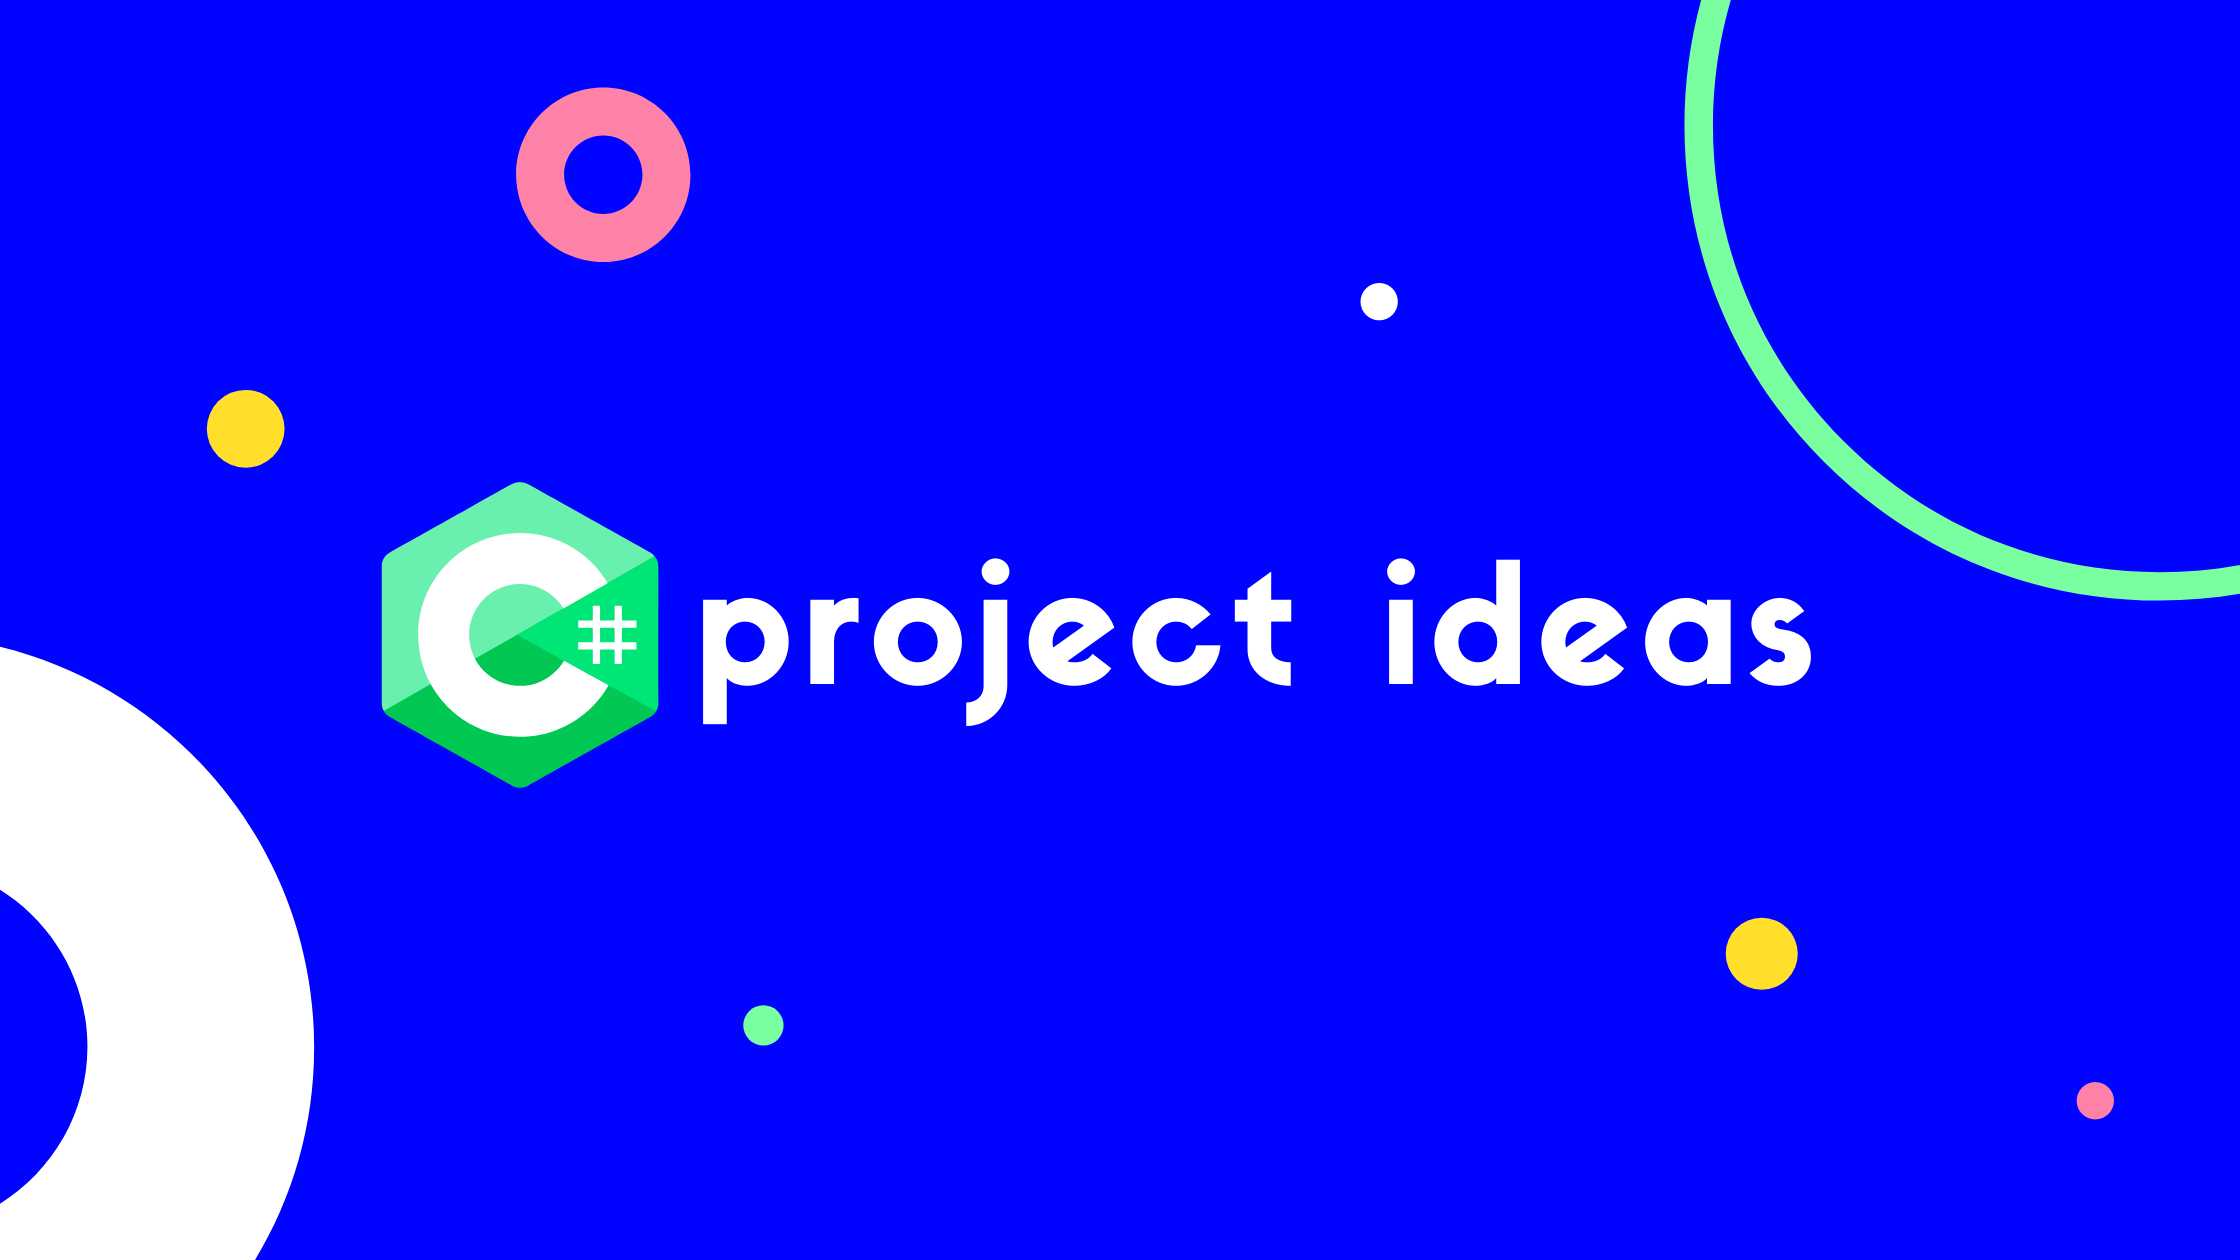 c projects ideas